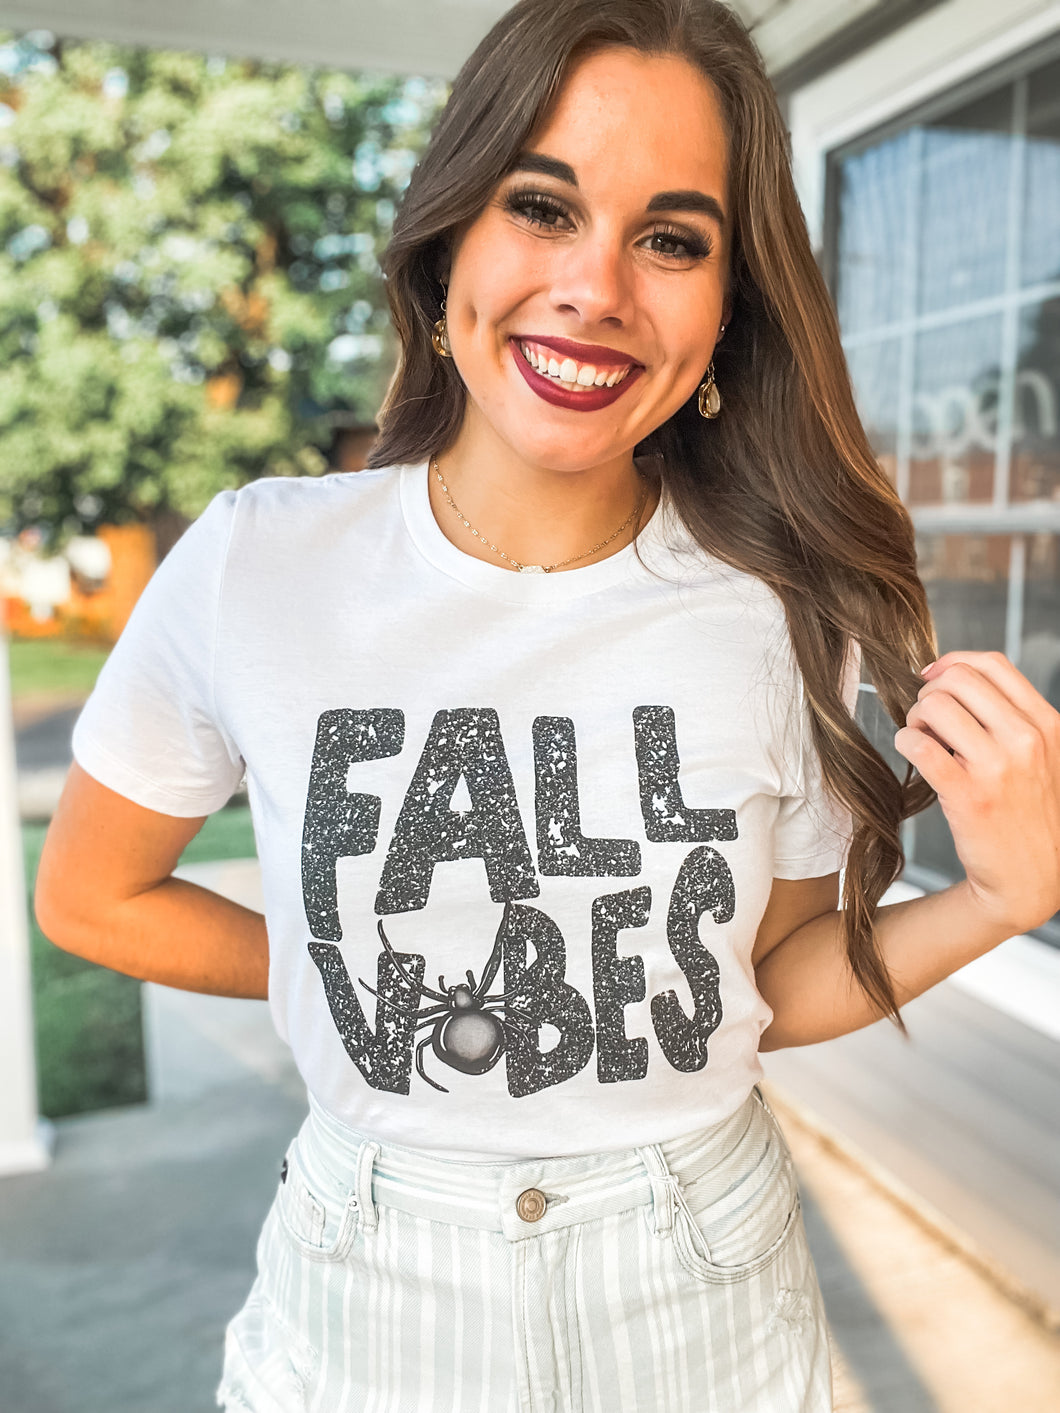 Fall Vibes Graphic Tee